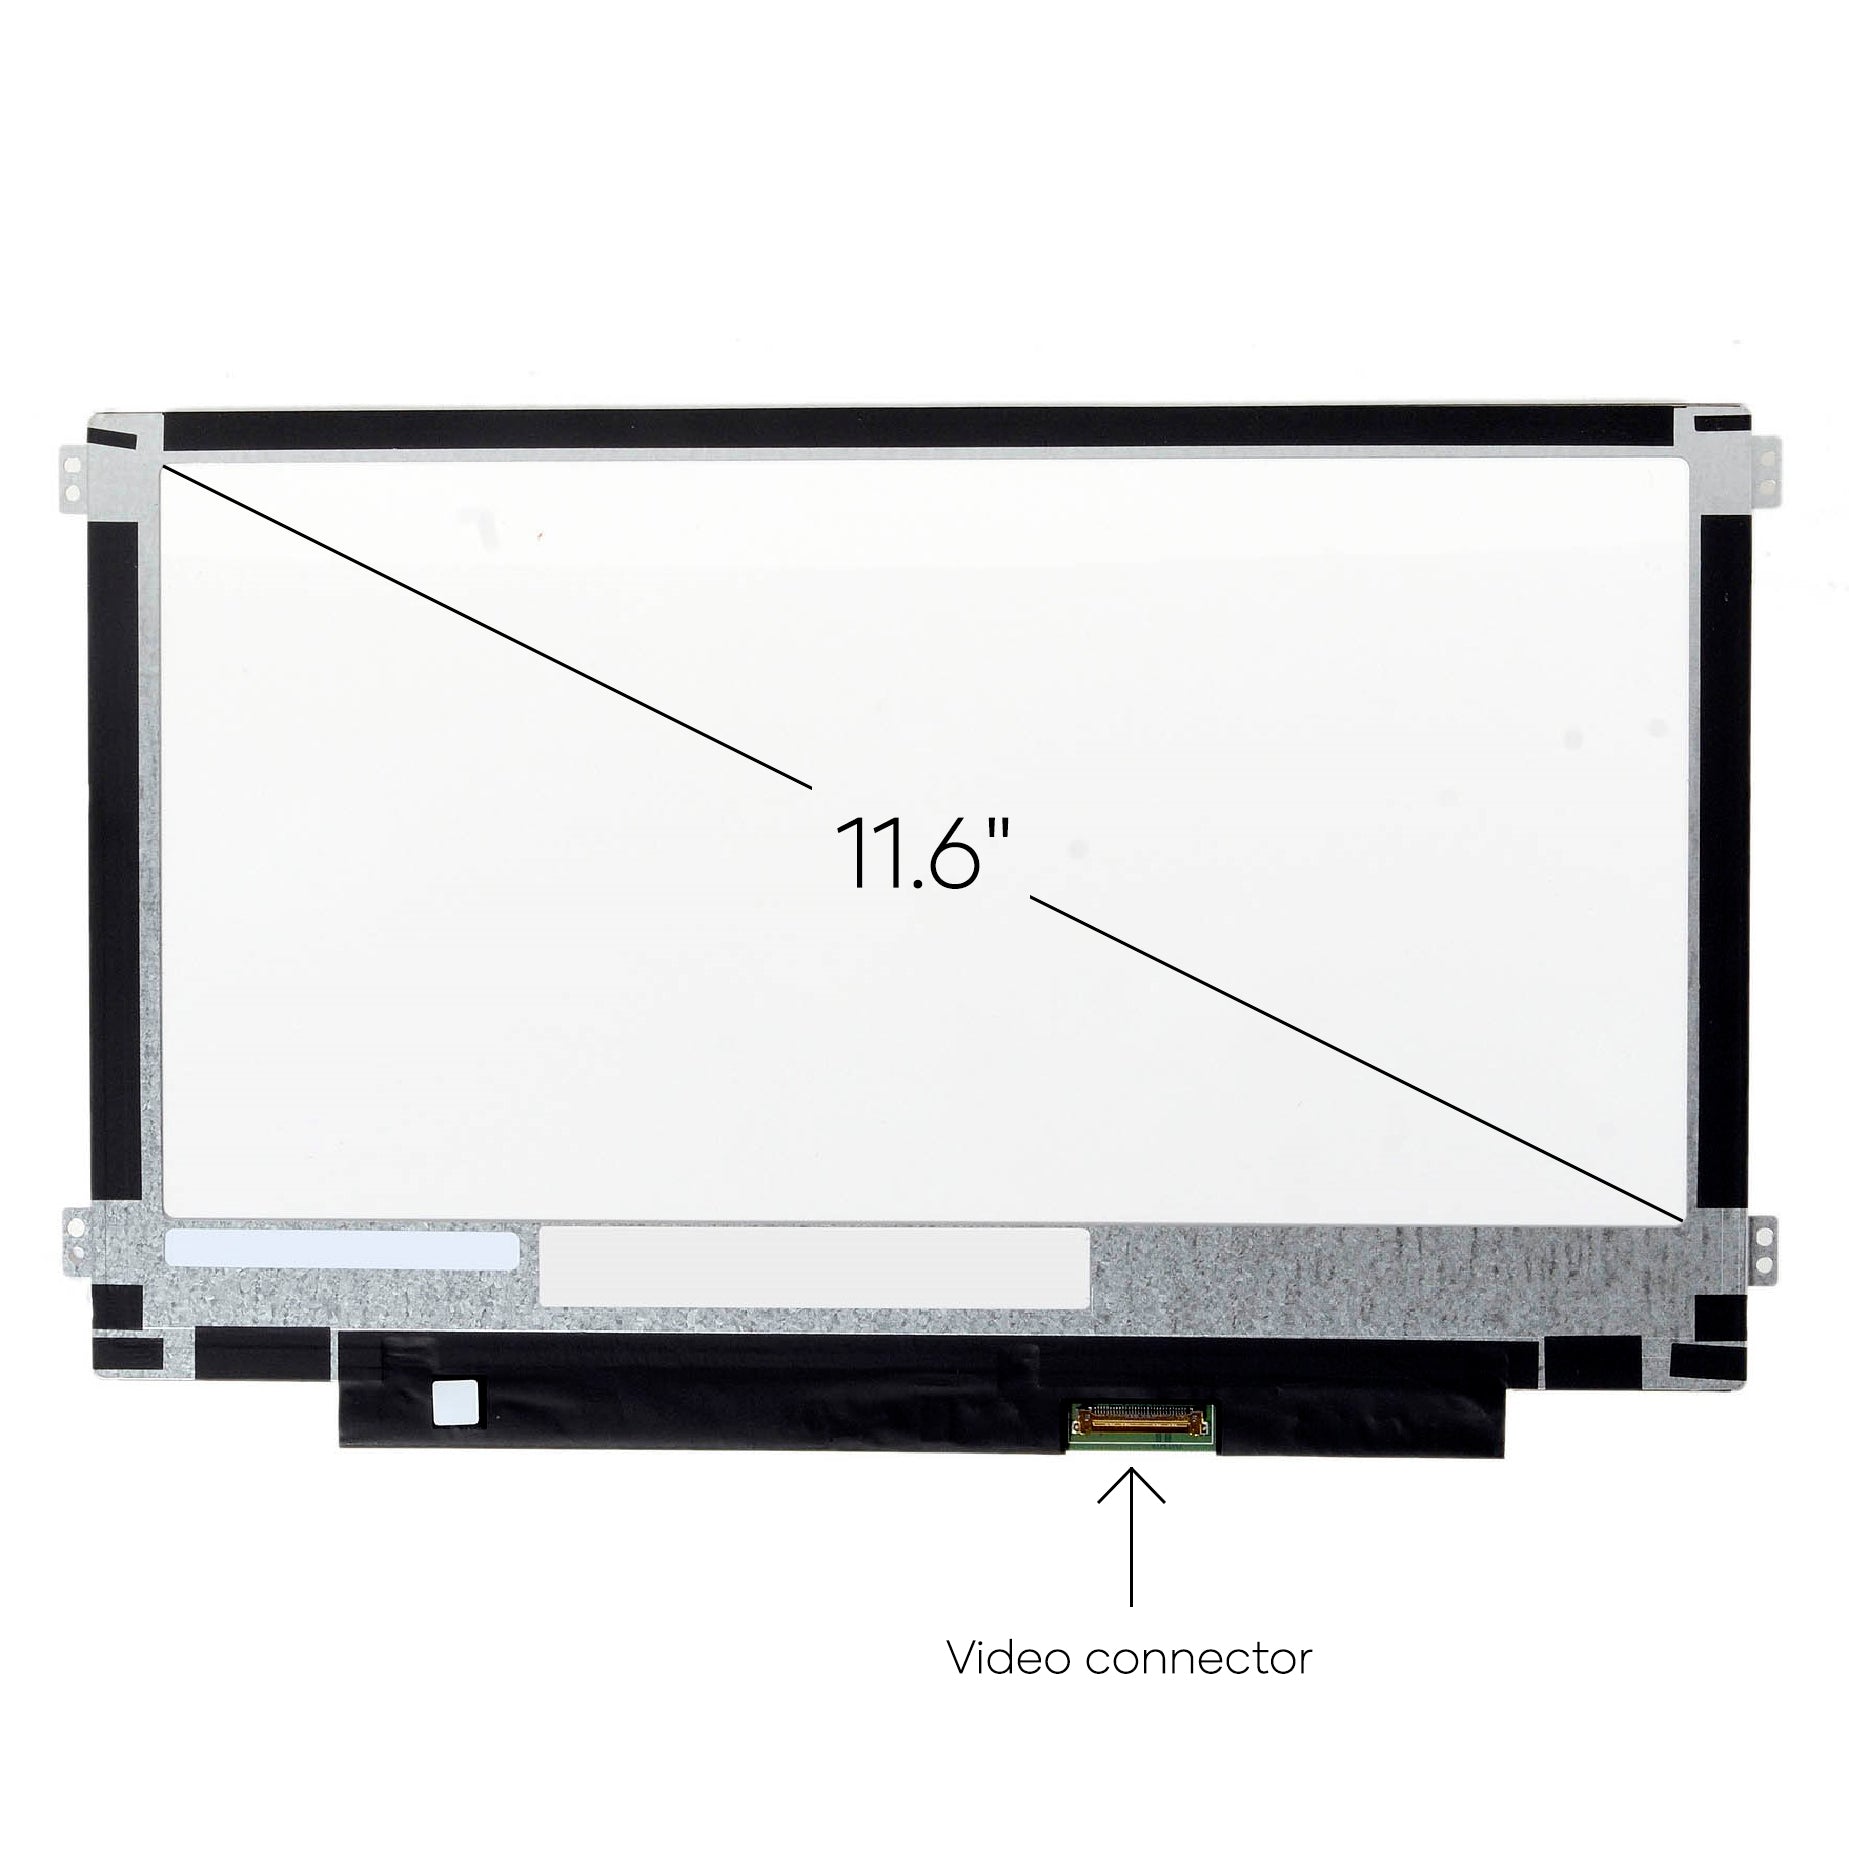 Screen Replacement for Acer Chromebook CB3-111-C9K2 HD 1366x768 Matte LCD LED Display